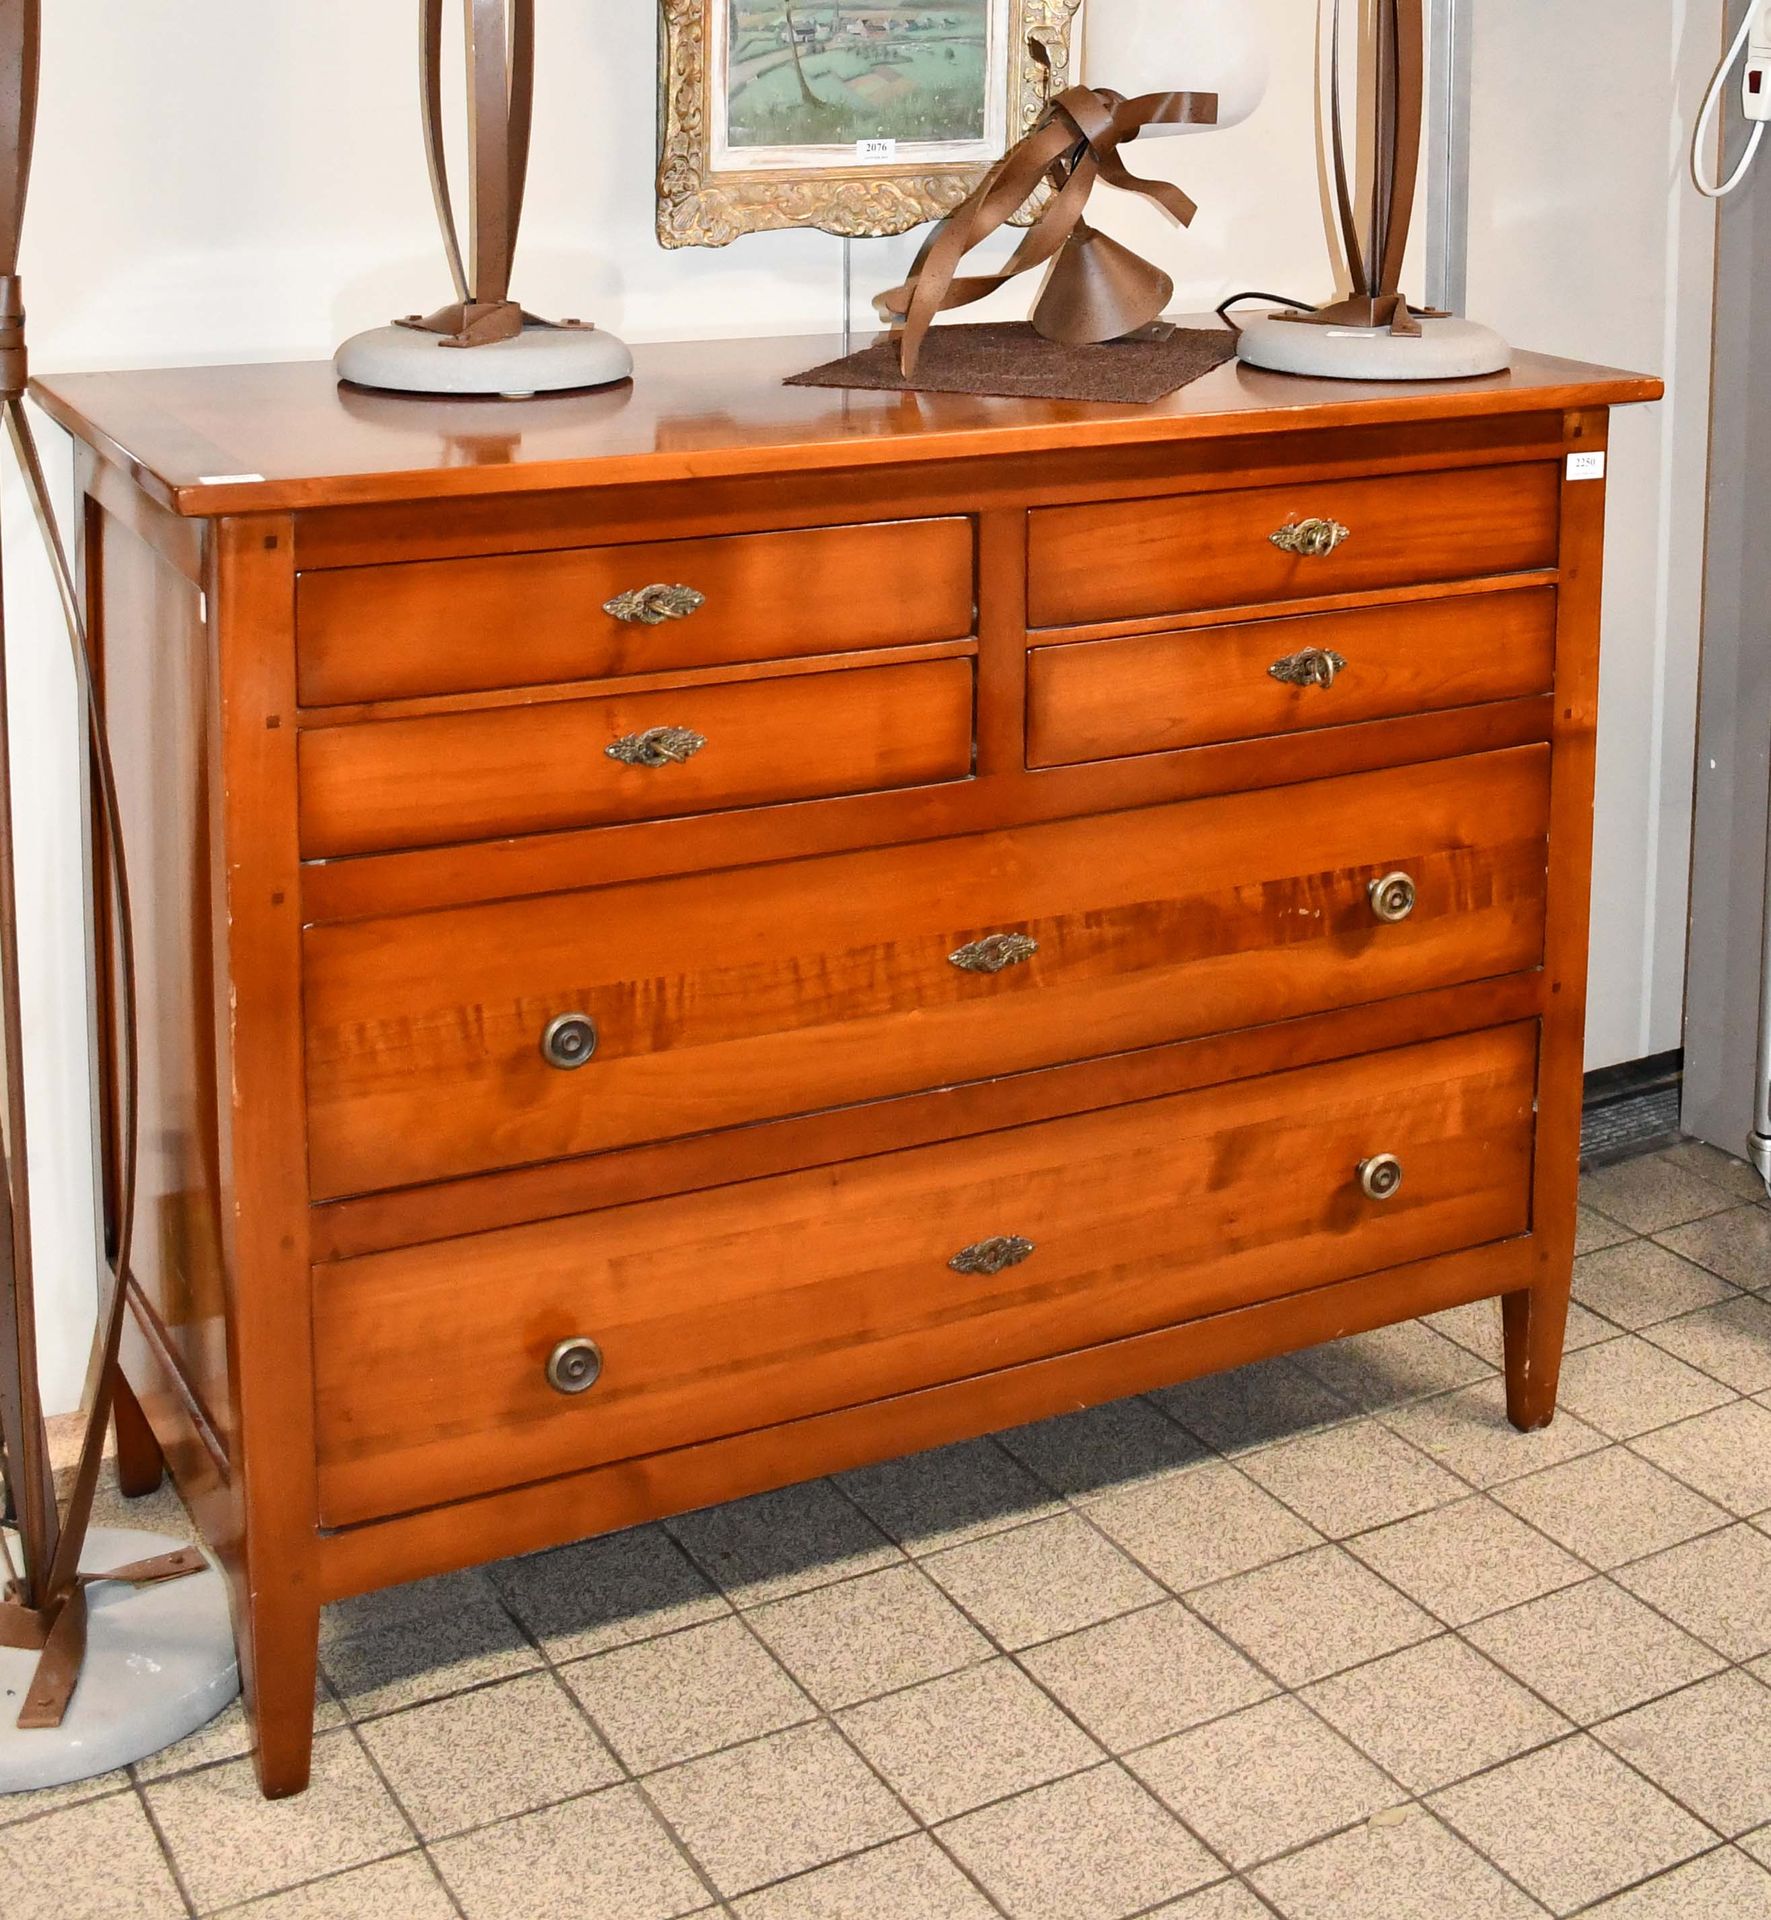 Null Cherry wood chest of drawers, with four rows of drawers